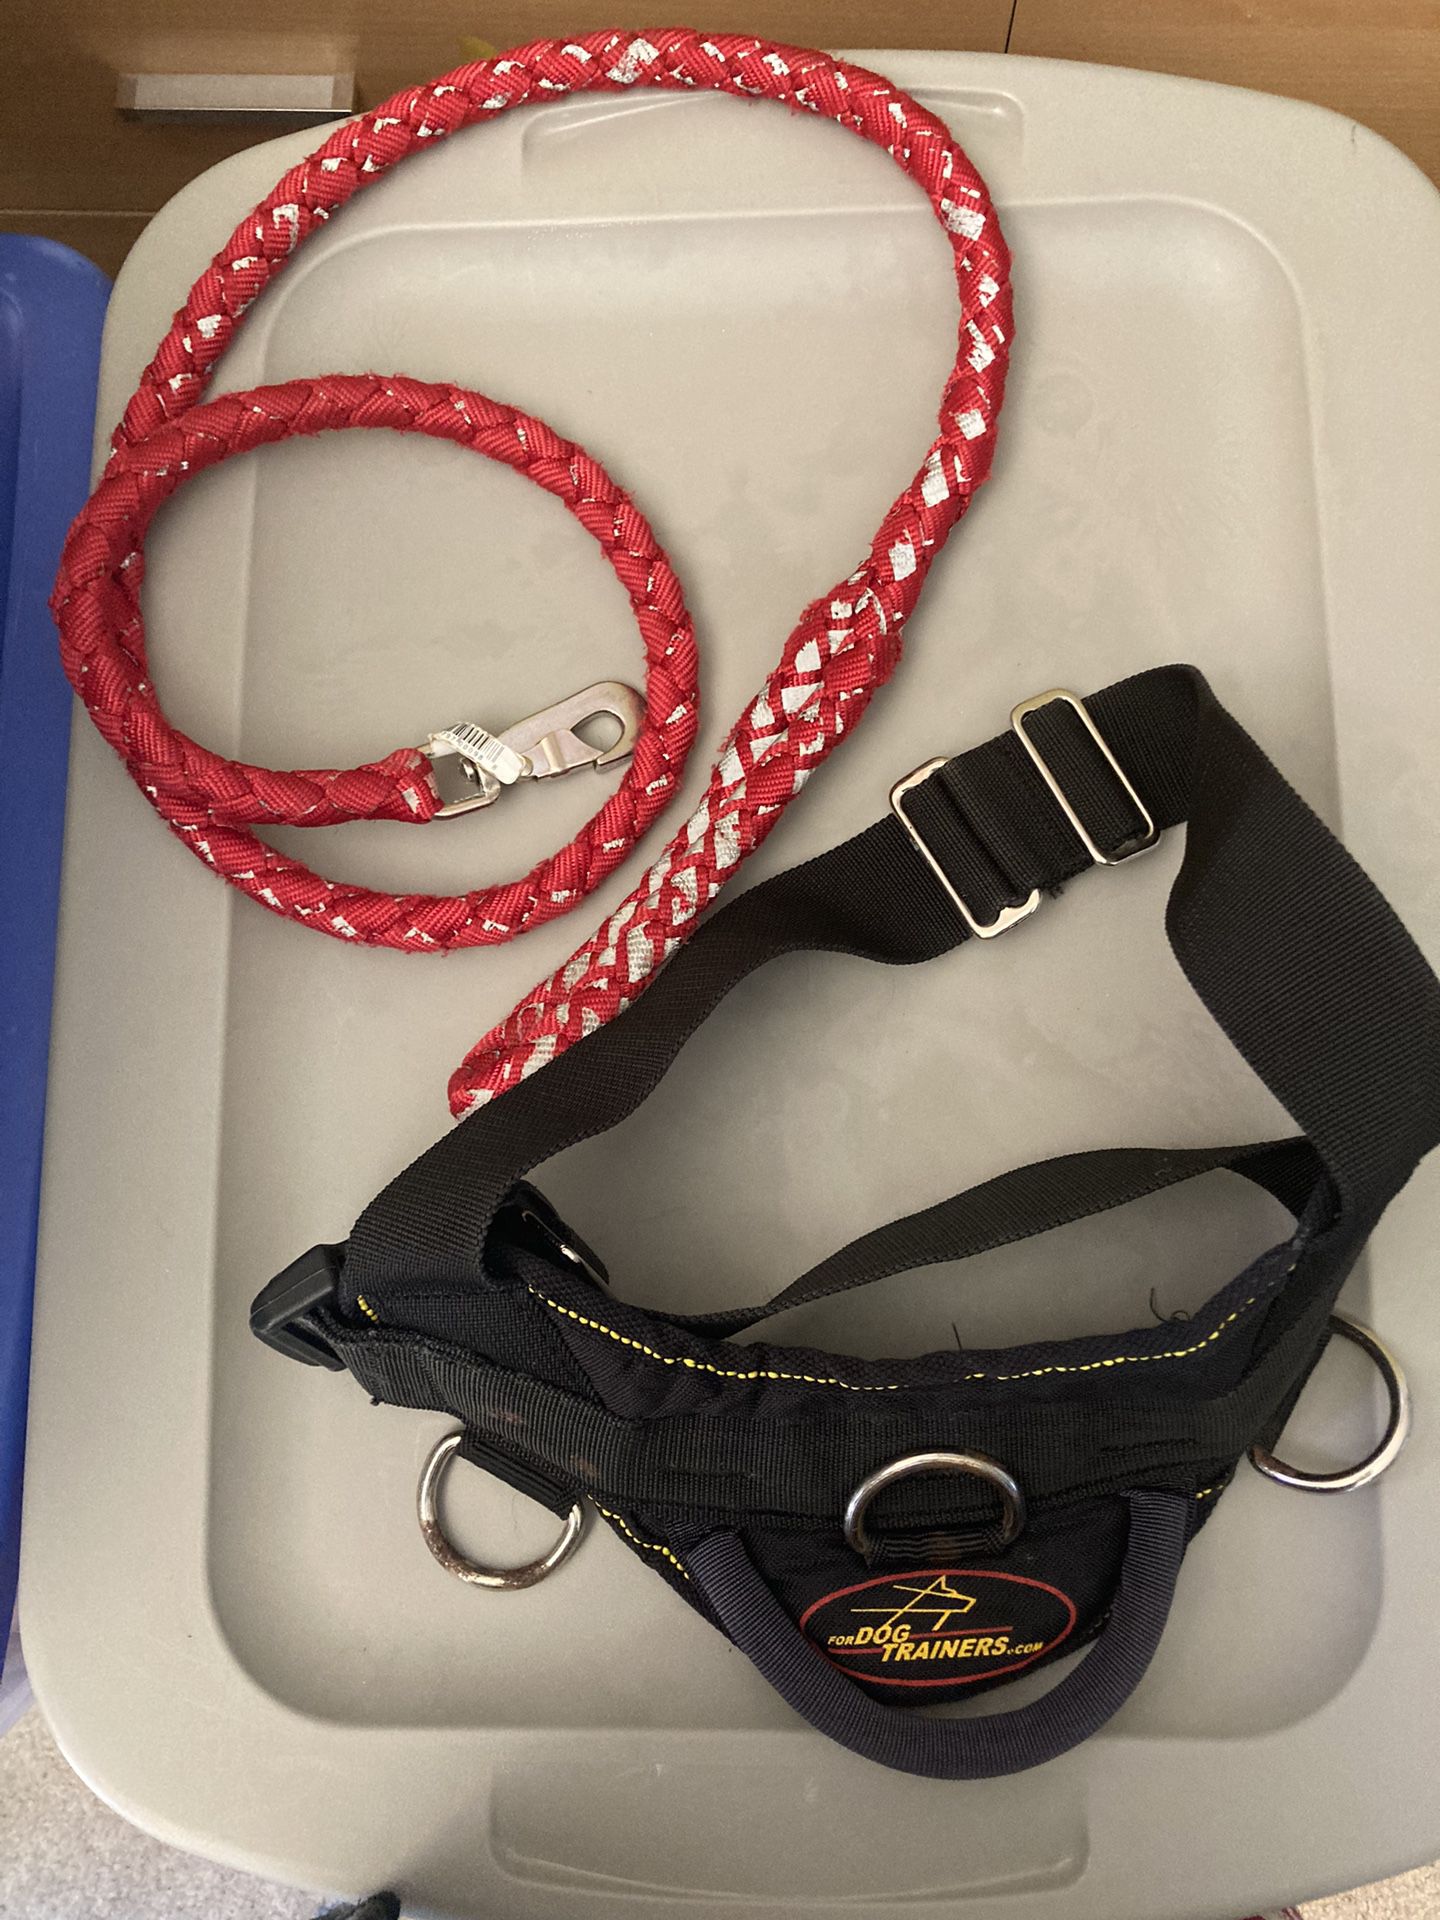 dog leash And Harness For Dog Trainer.